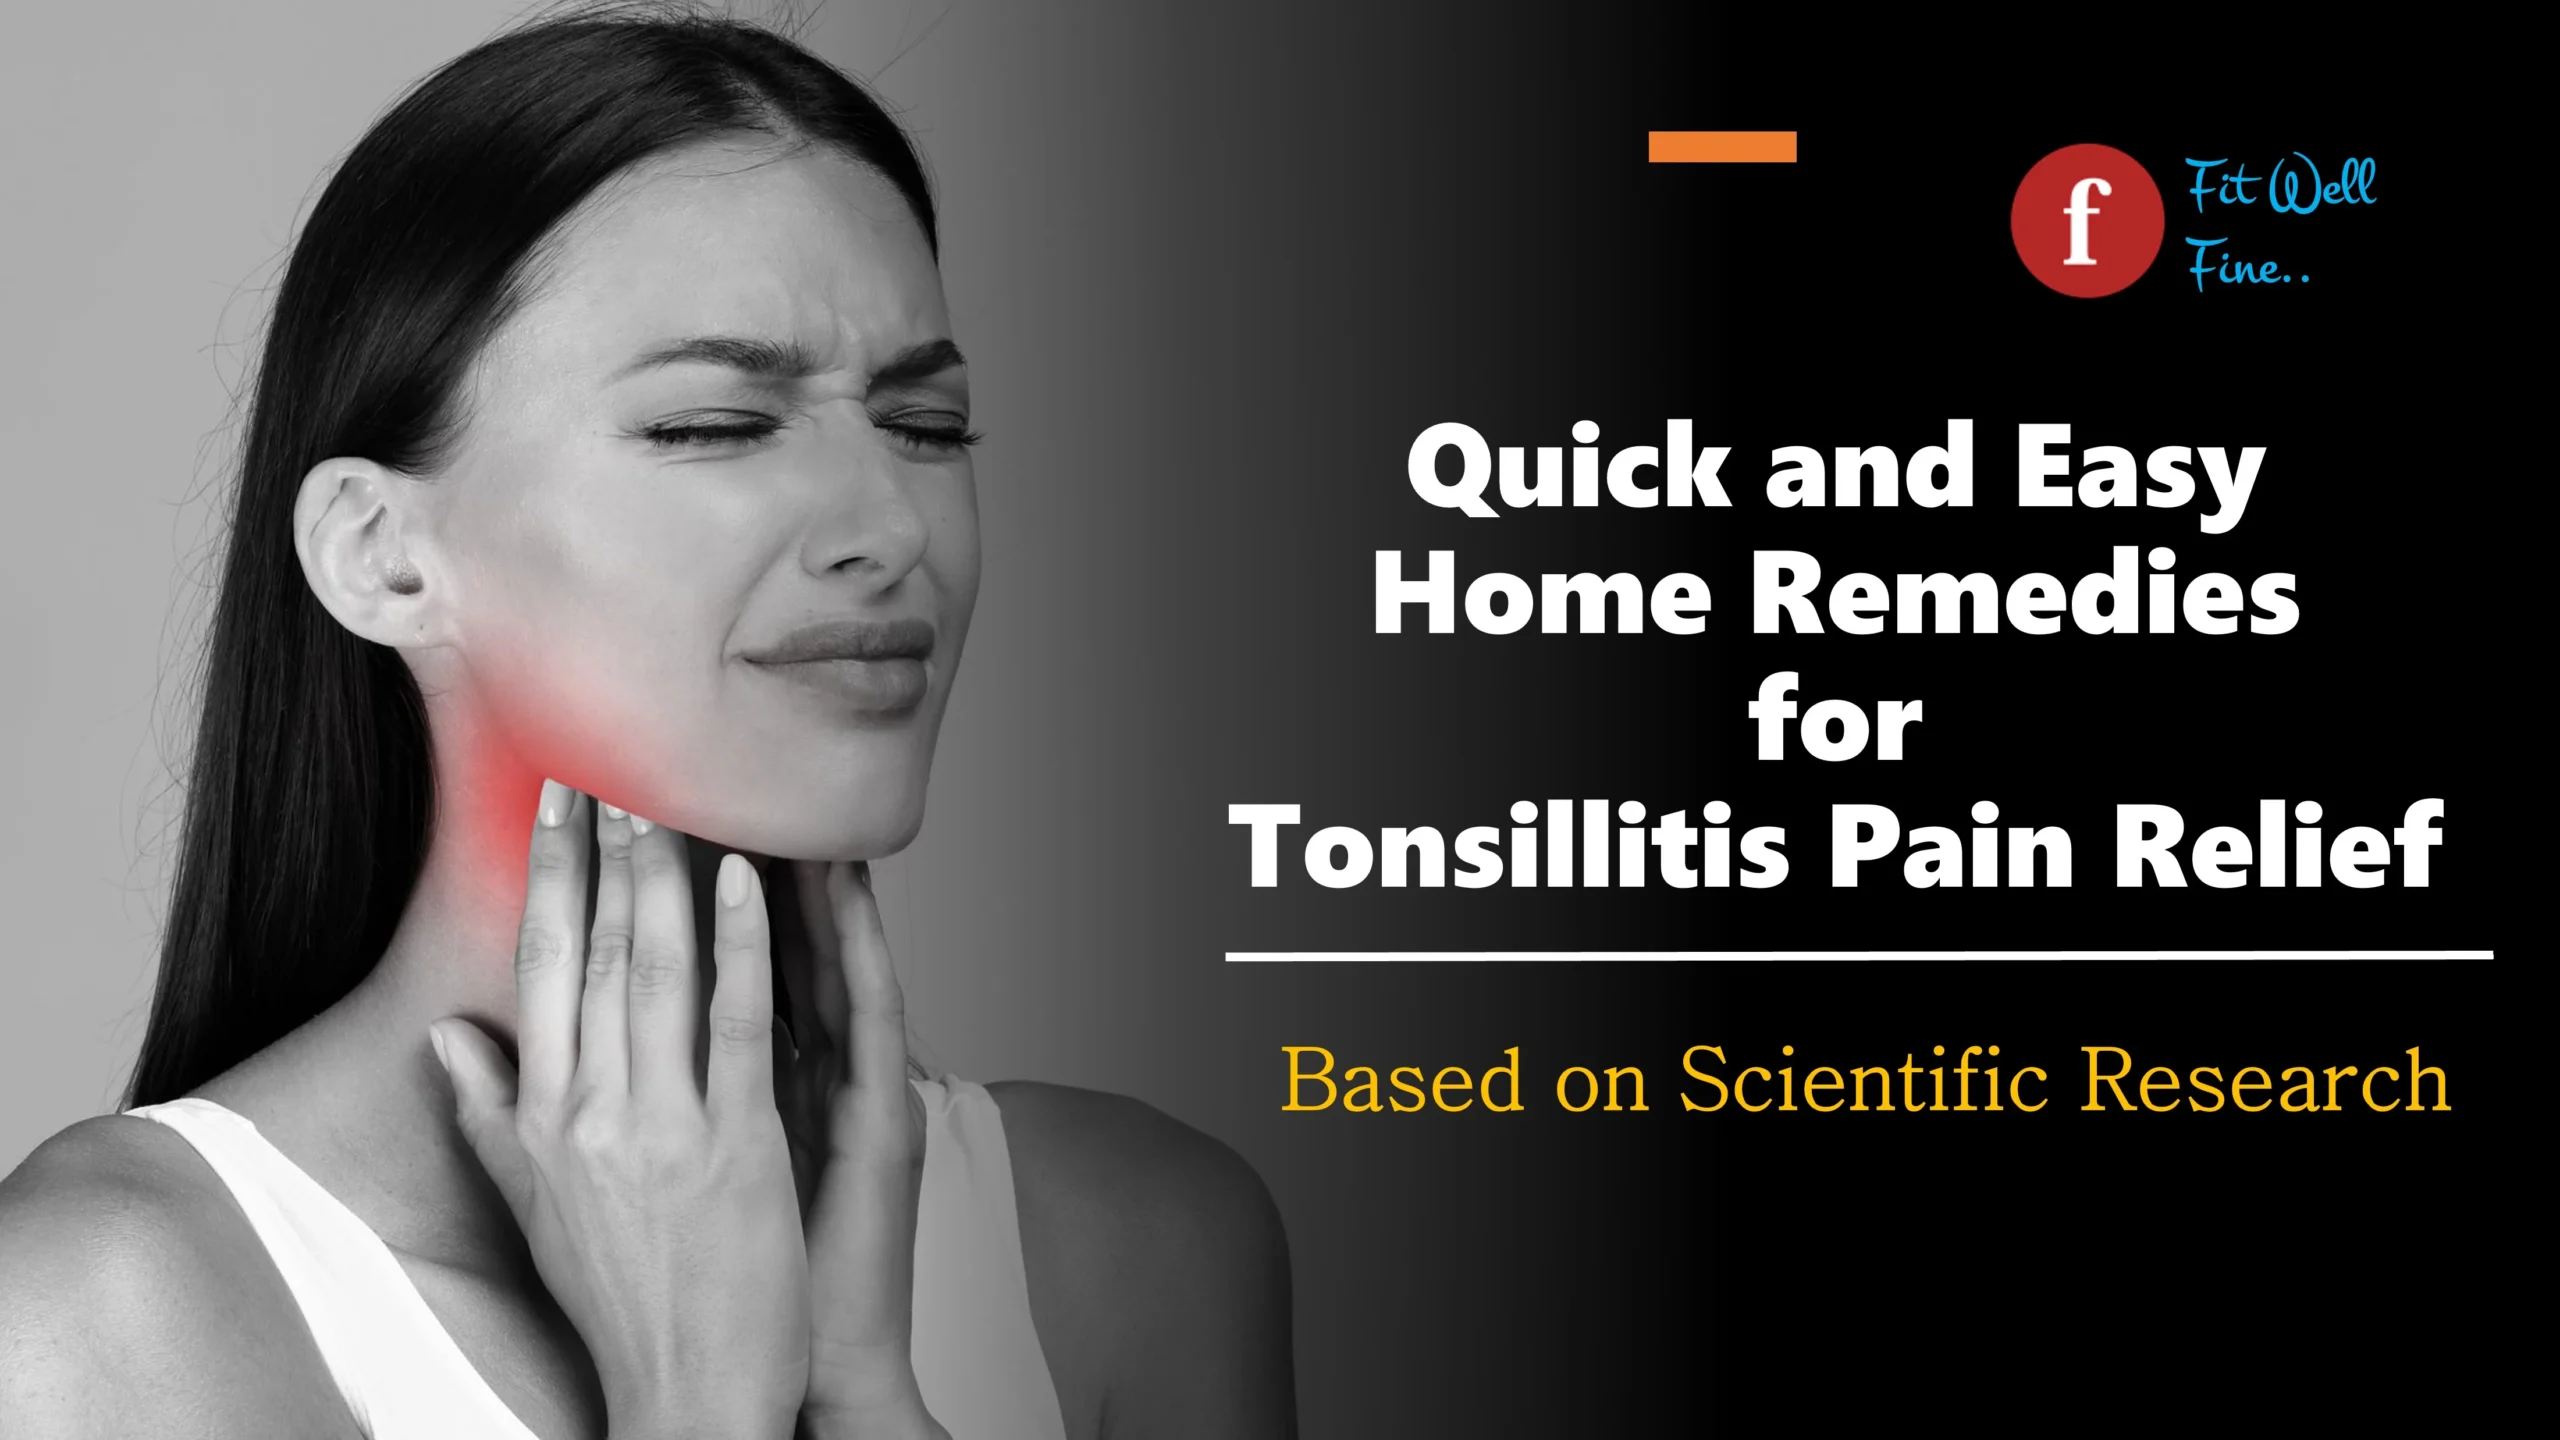 Home remedies for tonsillitis pain